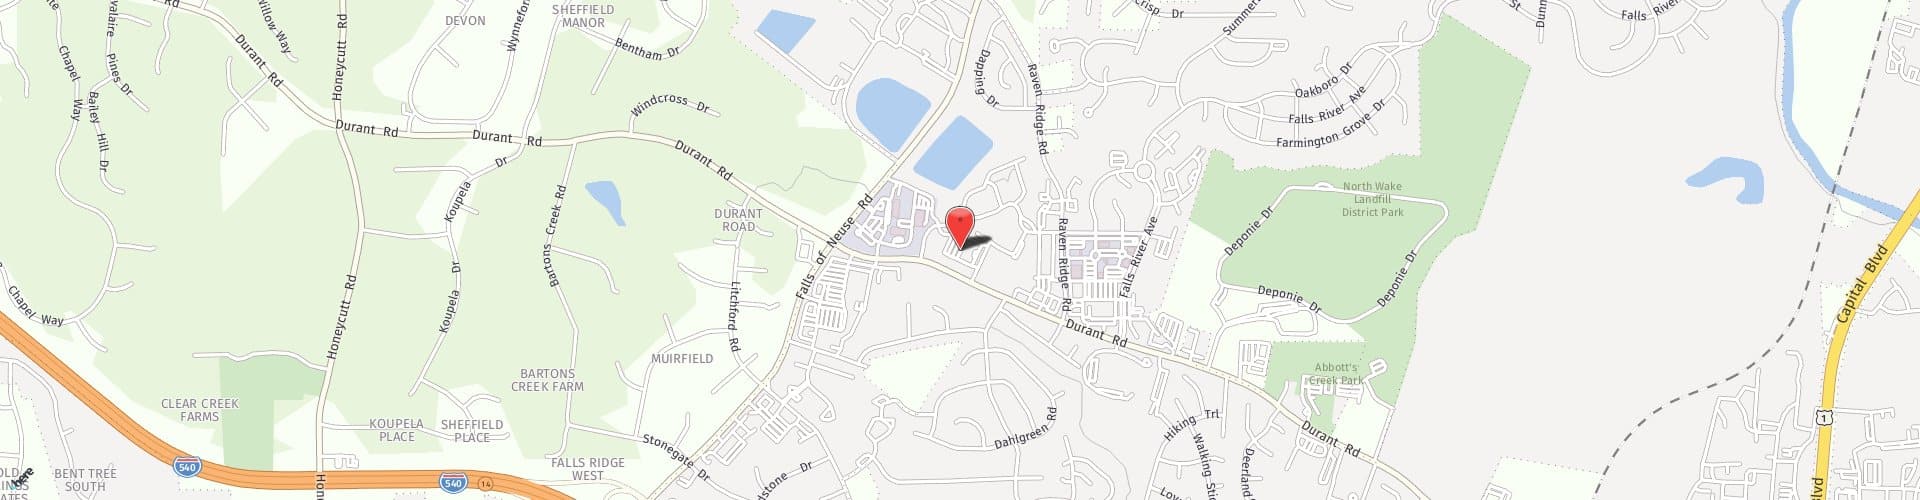 Location Map: 10880 Durant Road Raleigh, NC 27614